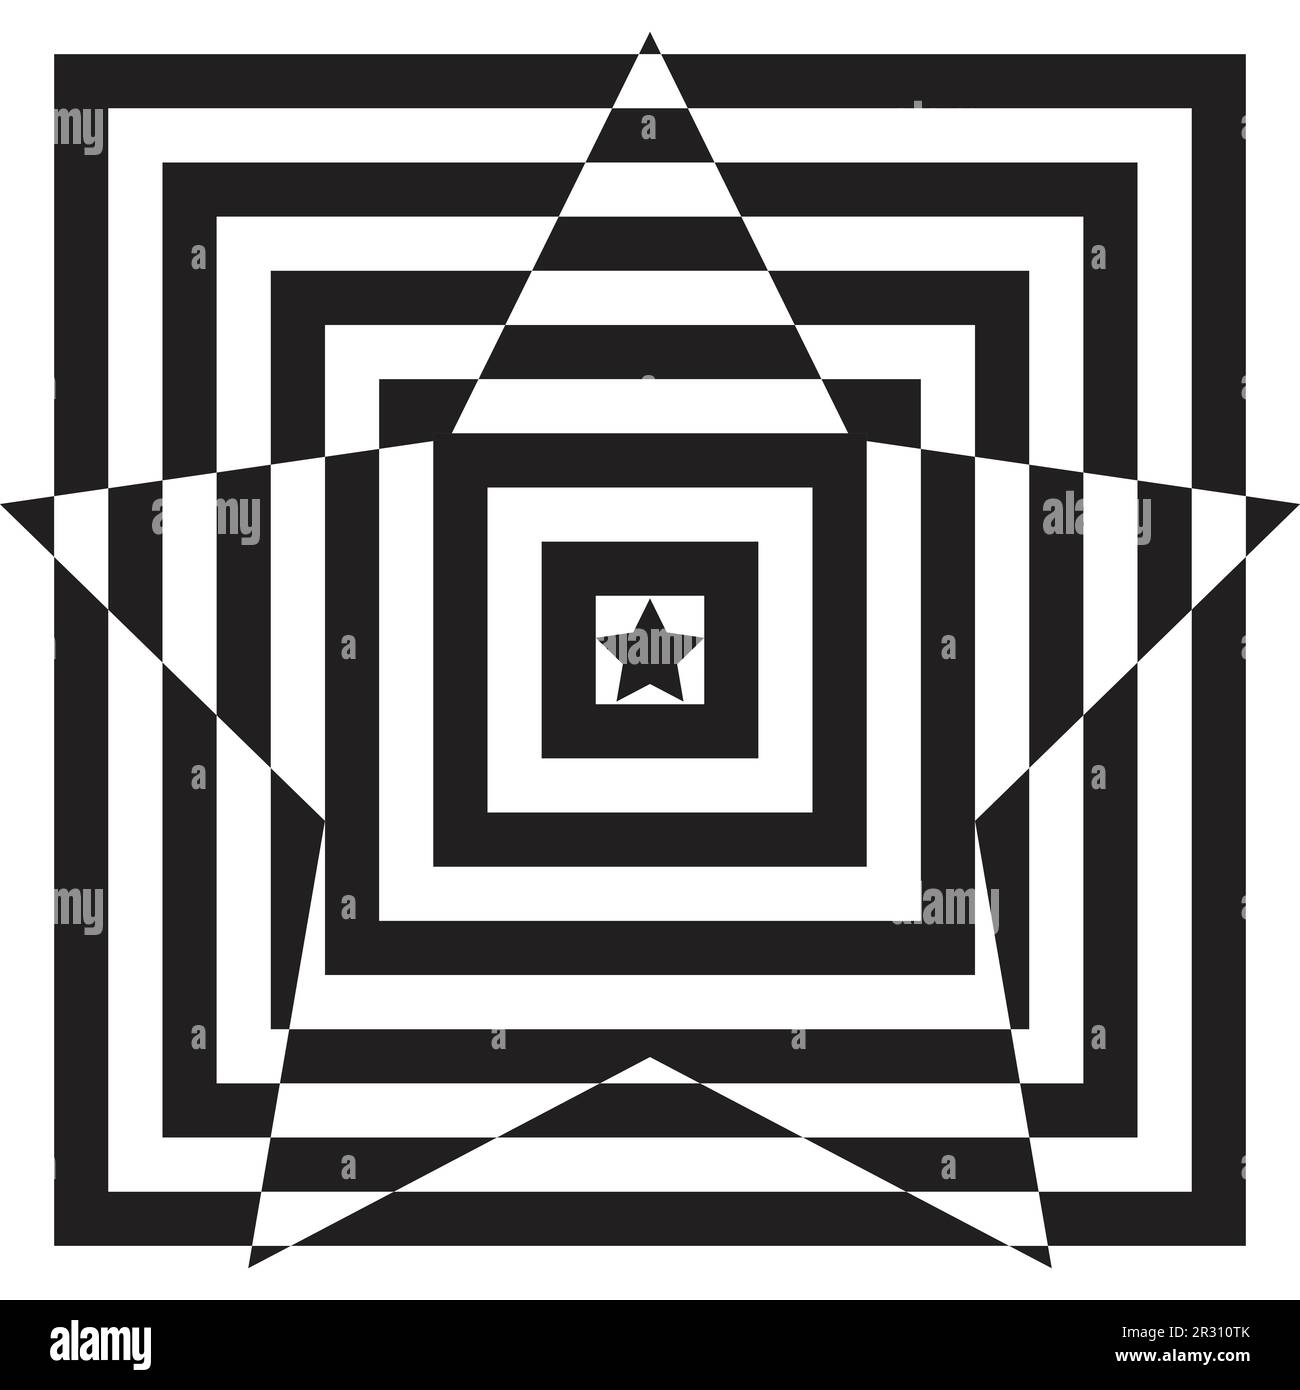 Abstract geometric pattern background with black and white star and ...